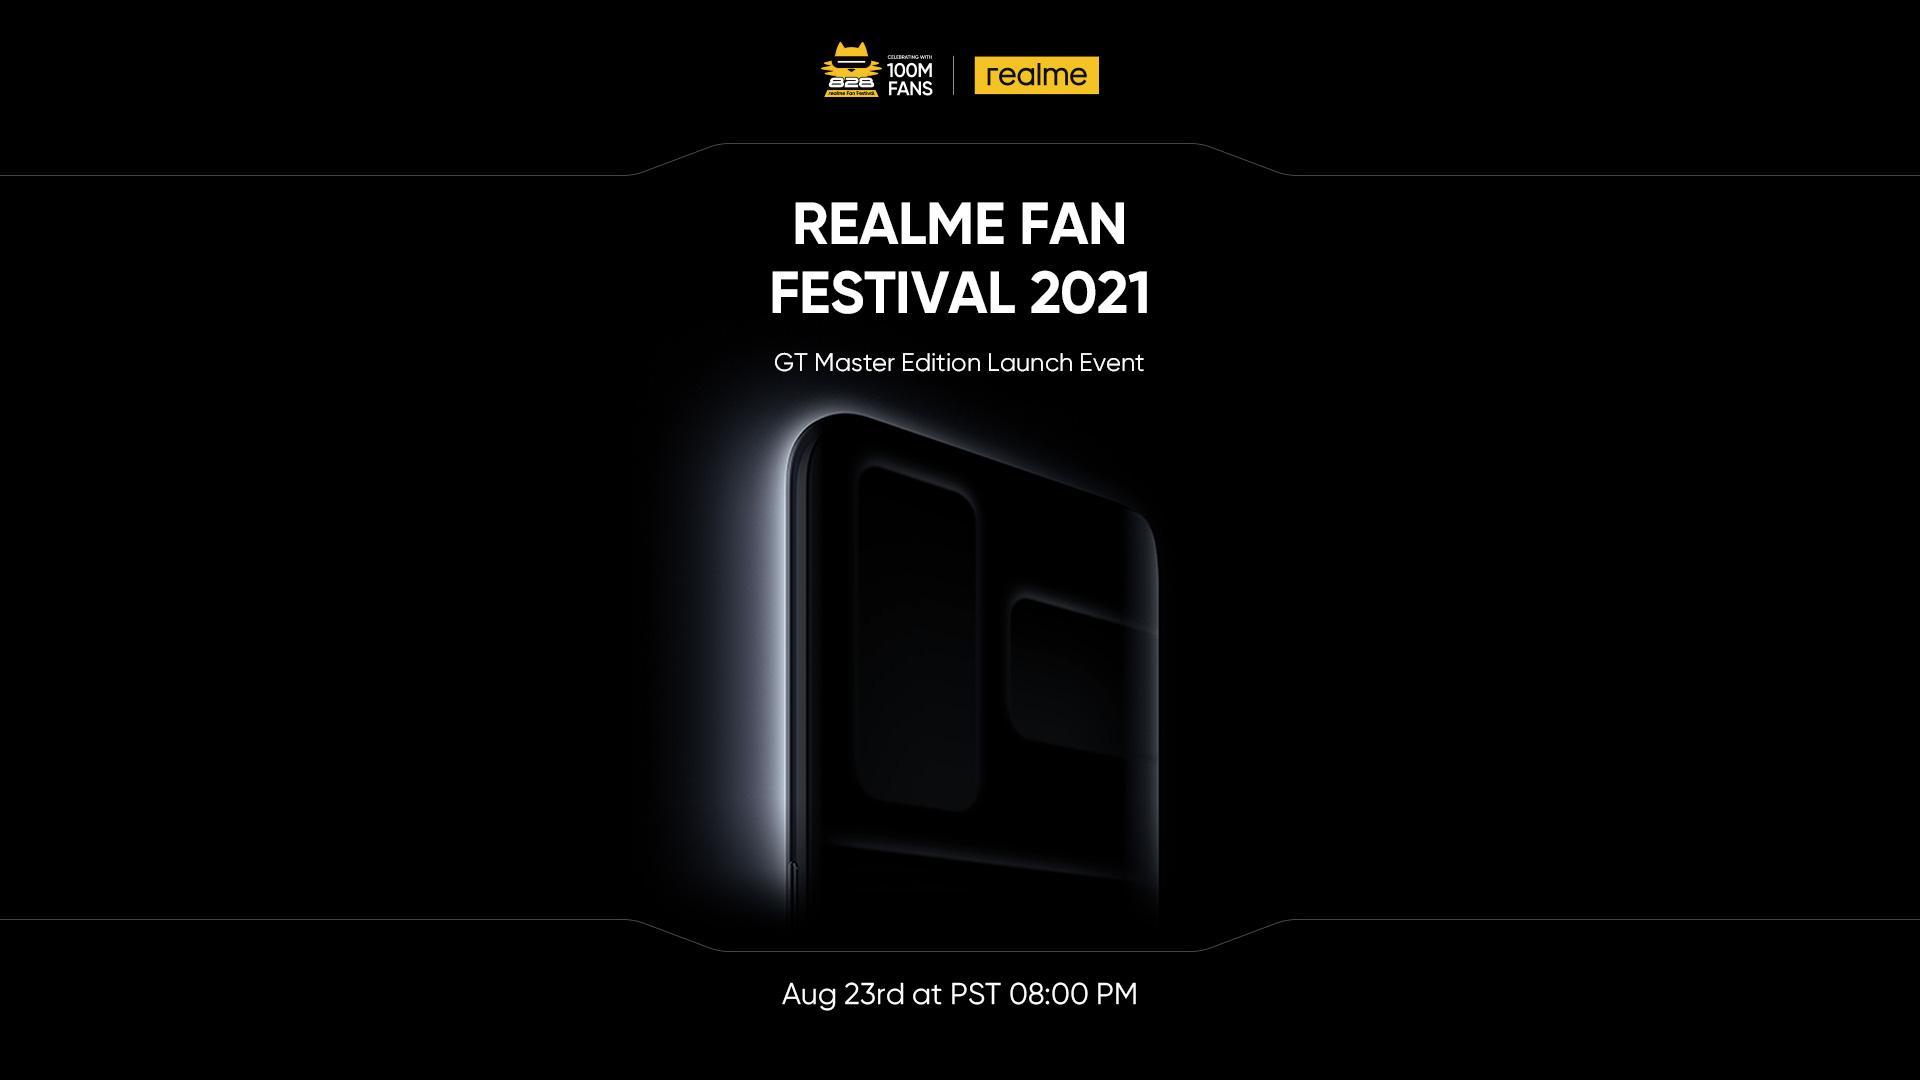 realme to Launch 100 Million Sales Milestone Product GT Master Edition Series and Other Product Lines on August 23